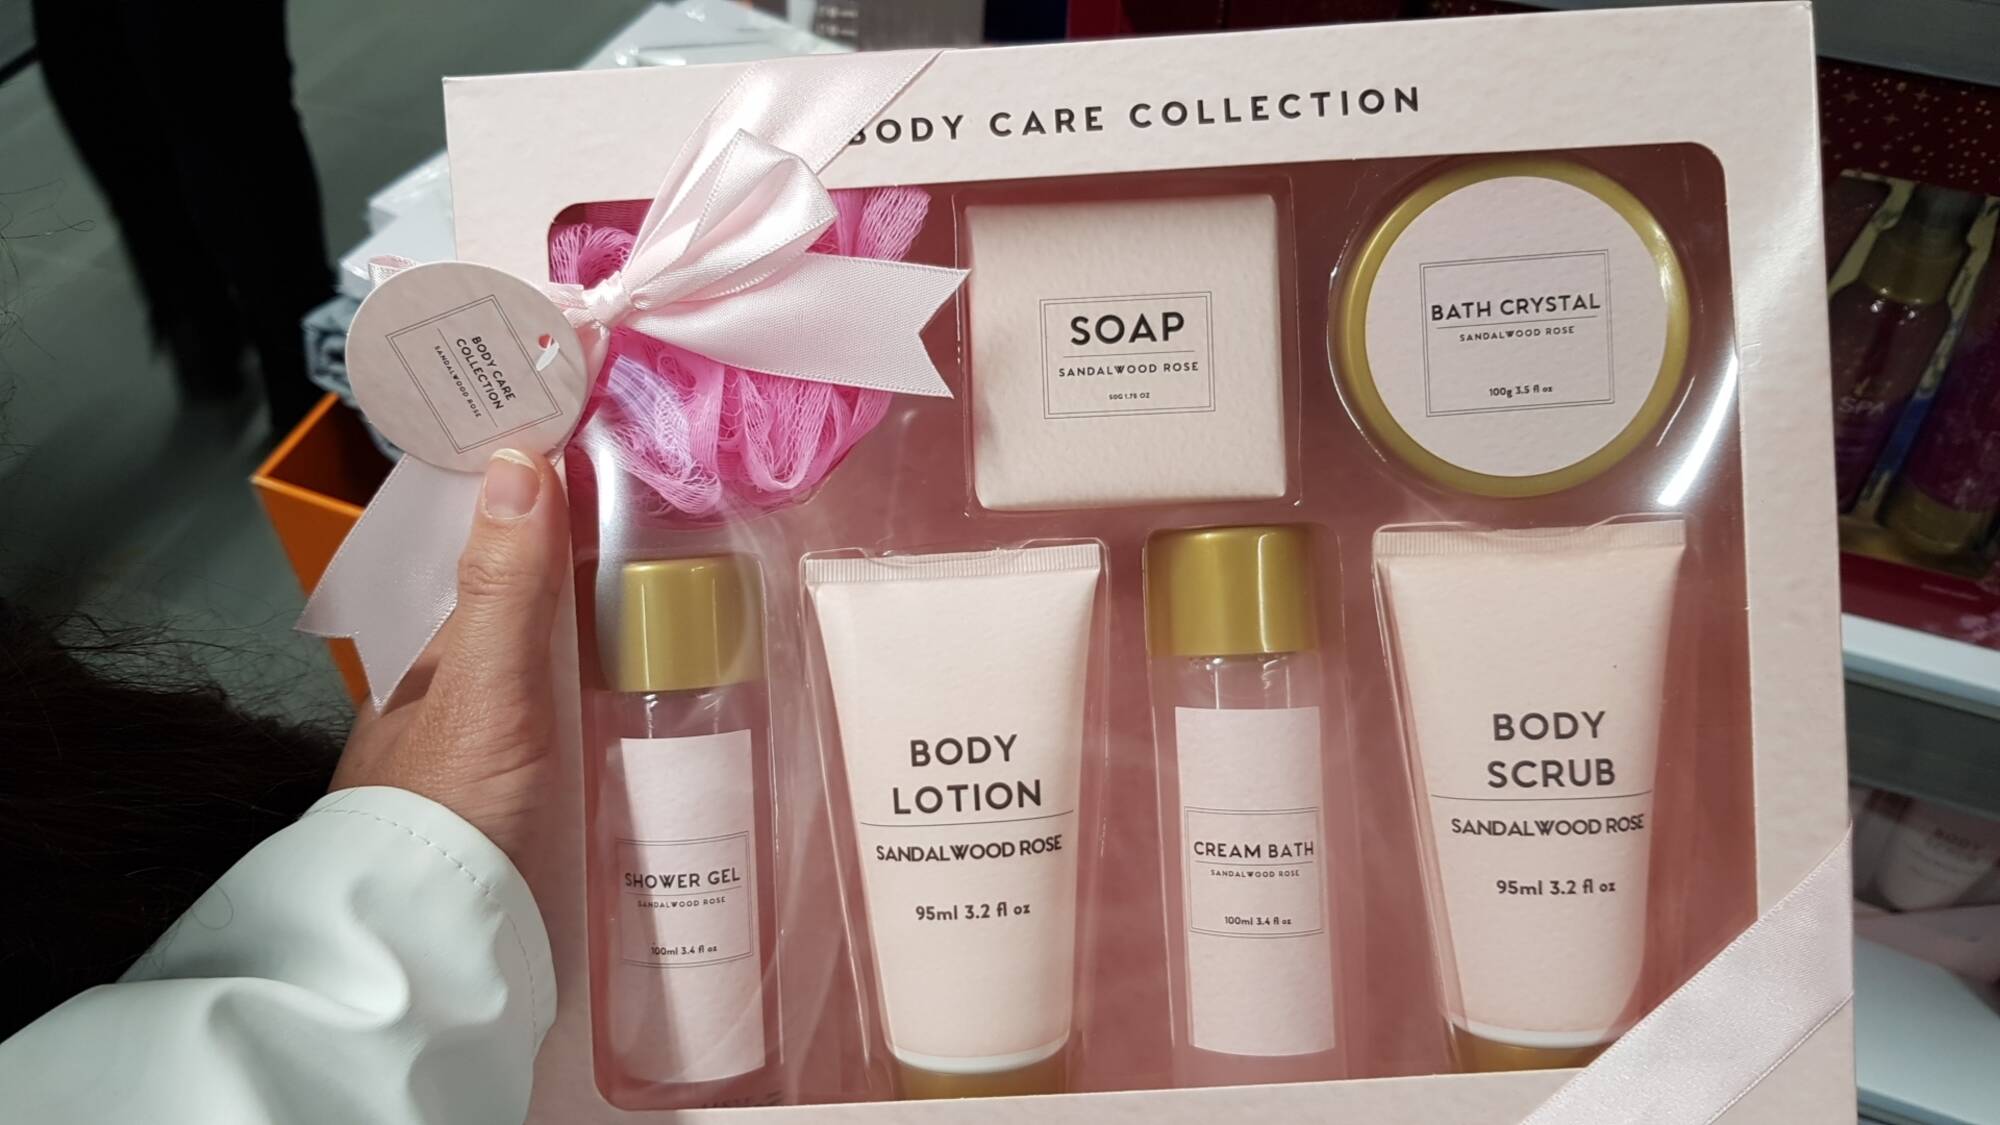 SPRANETY - Sandalwood rose - Body care collection